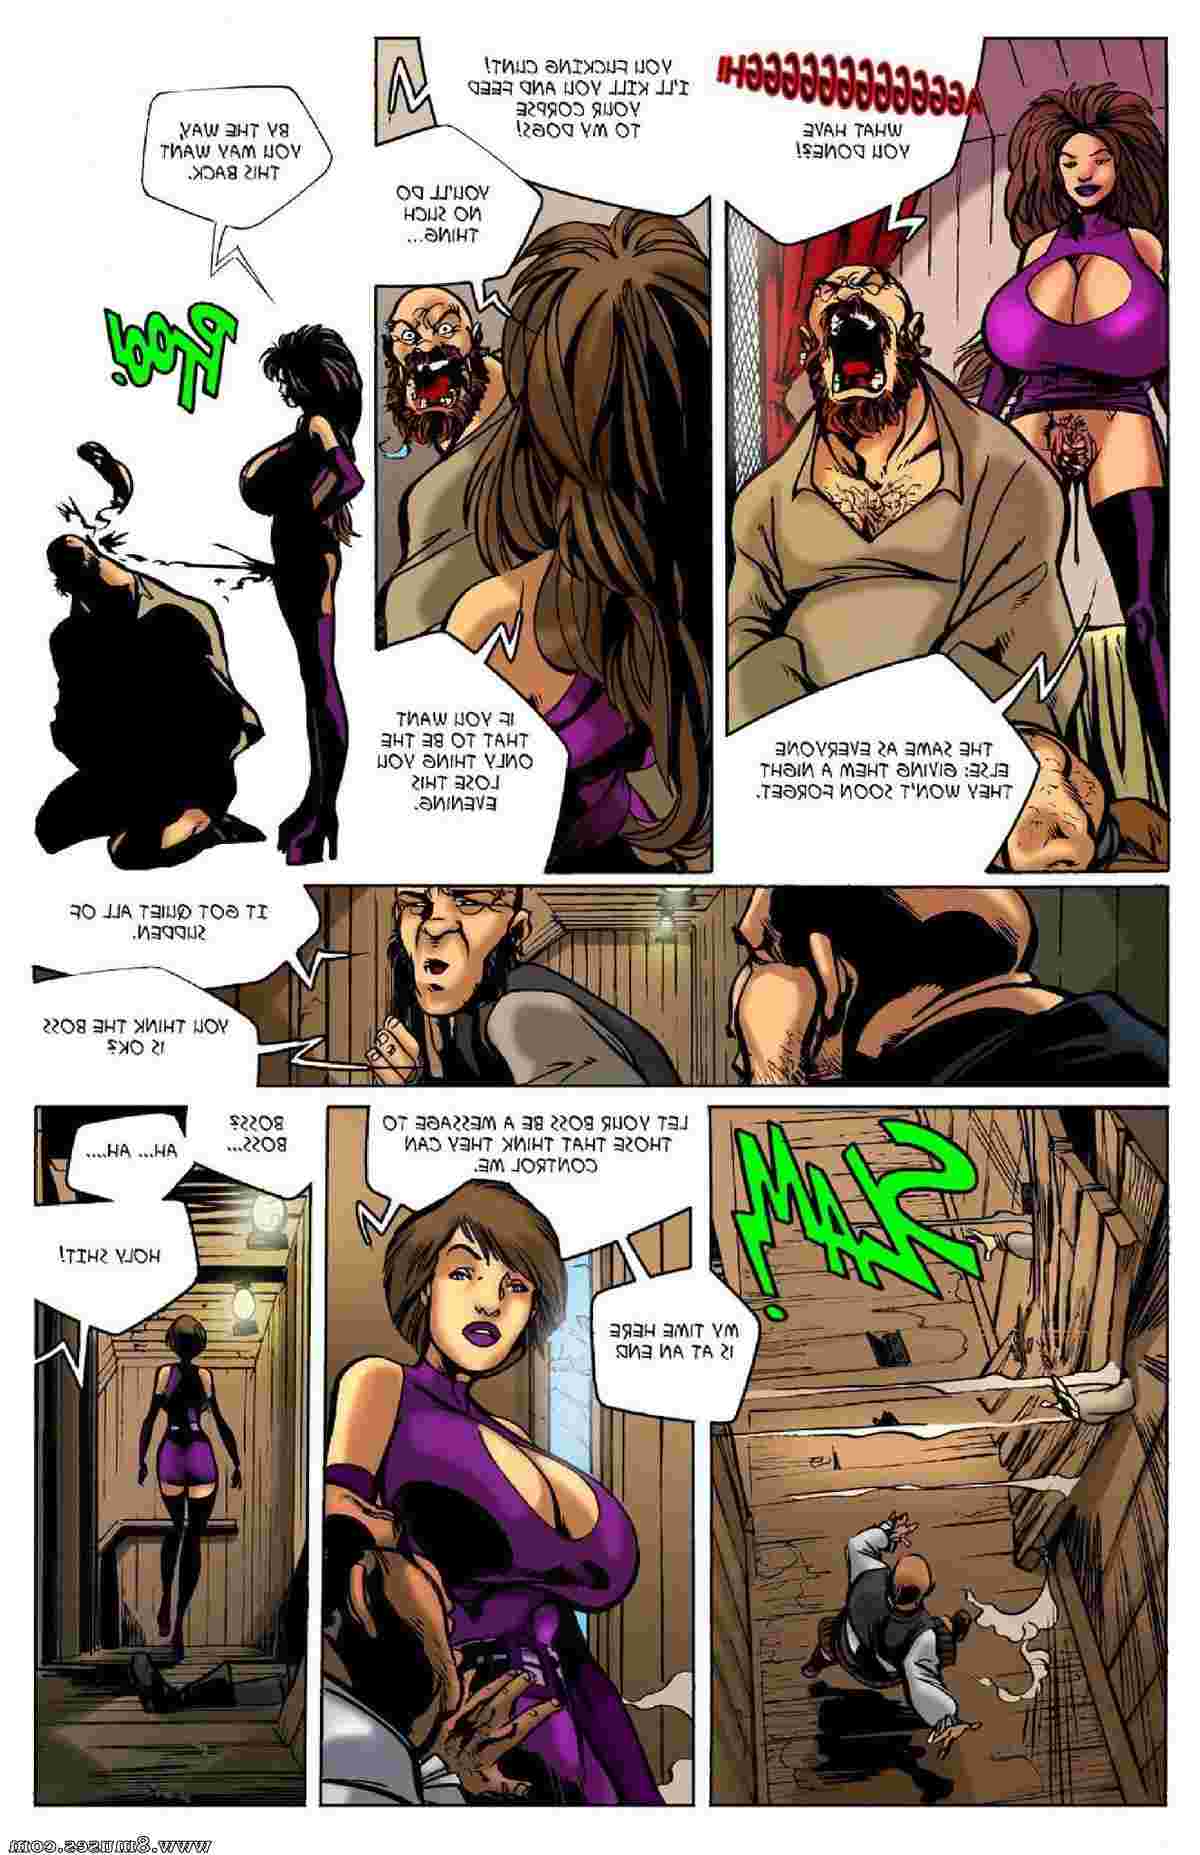 BE-Story-Club-Comics/Unstable-Assets Unstable_Assets__8muses_-_Sex_and_Porn_Comics_70.jpg